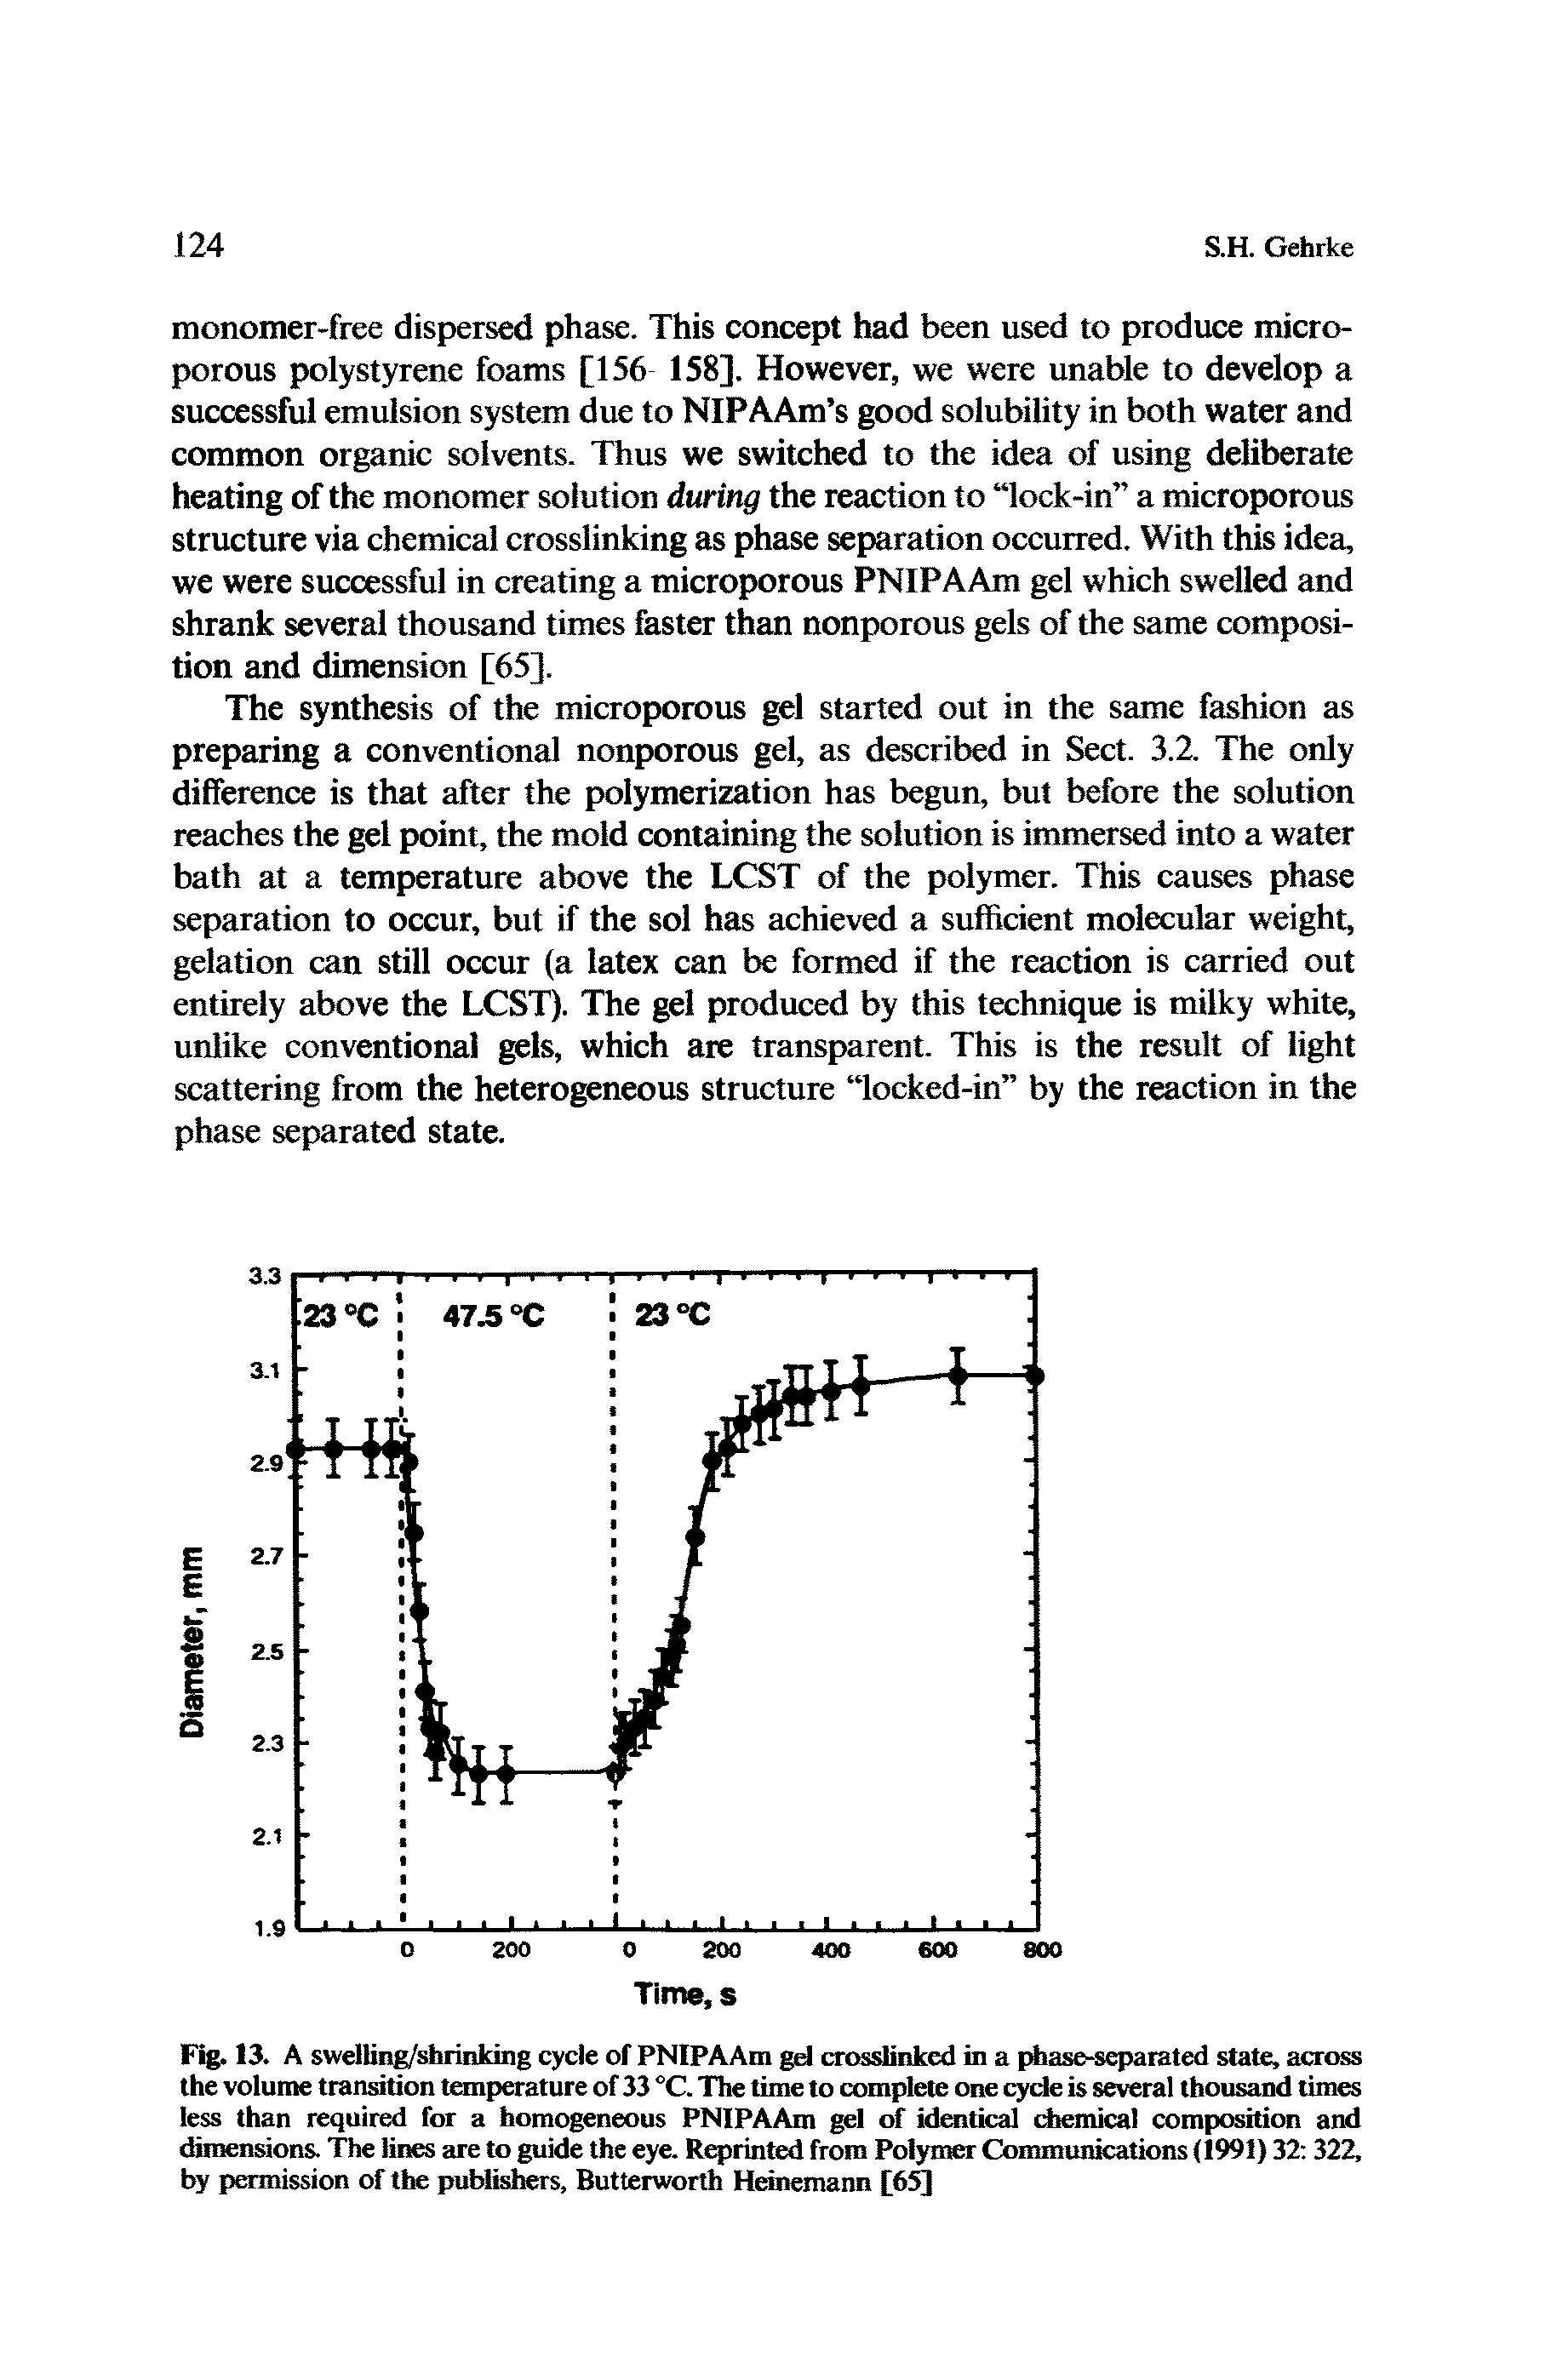 Fig. 13. A swelling/shrinking cycle of PNIPAAm gel crosslinkcd in a phase-separated state, across the volume transition temperature of 33 °C. The time to complete one cycle is several thousand times less than required for a homogeneous PNIPAAm gel of identical chemical composition and dimensions. The lines are to guide the eye. Reprinted from Polymer Communications (1991) 32 322, by permission of the publishers, Butterworth Heinemann [65]...